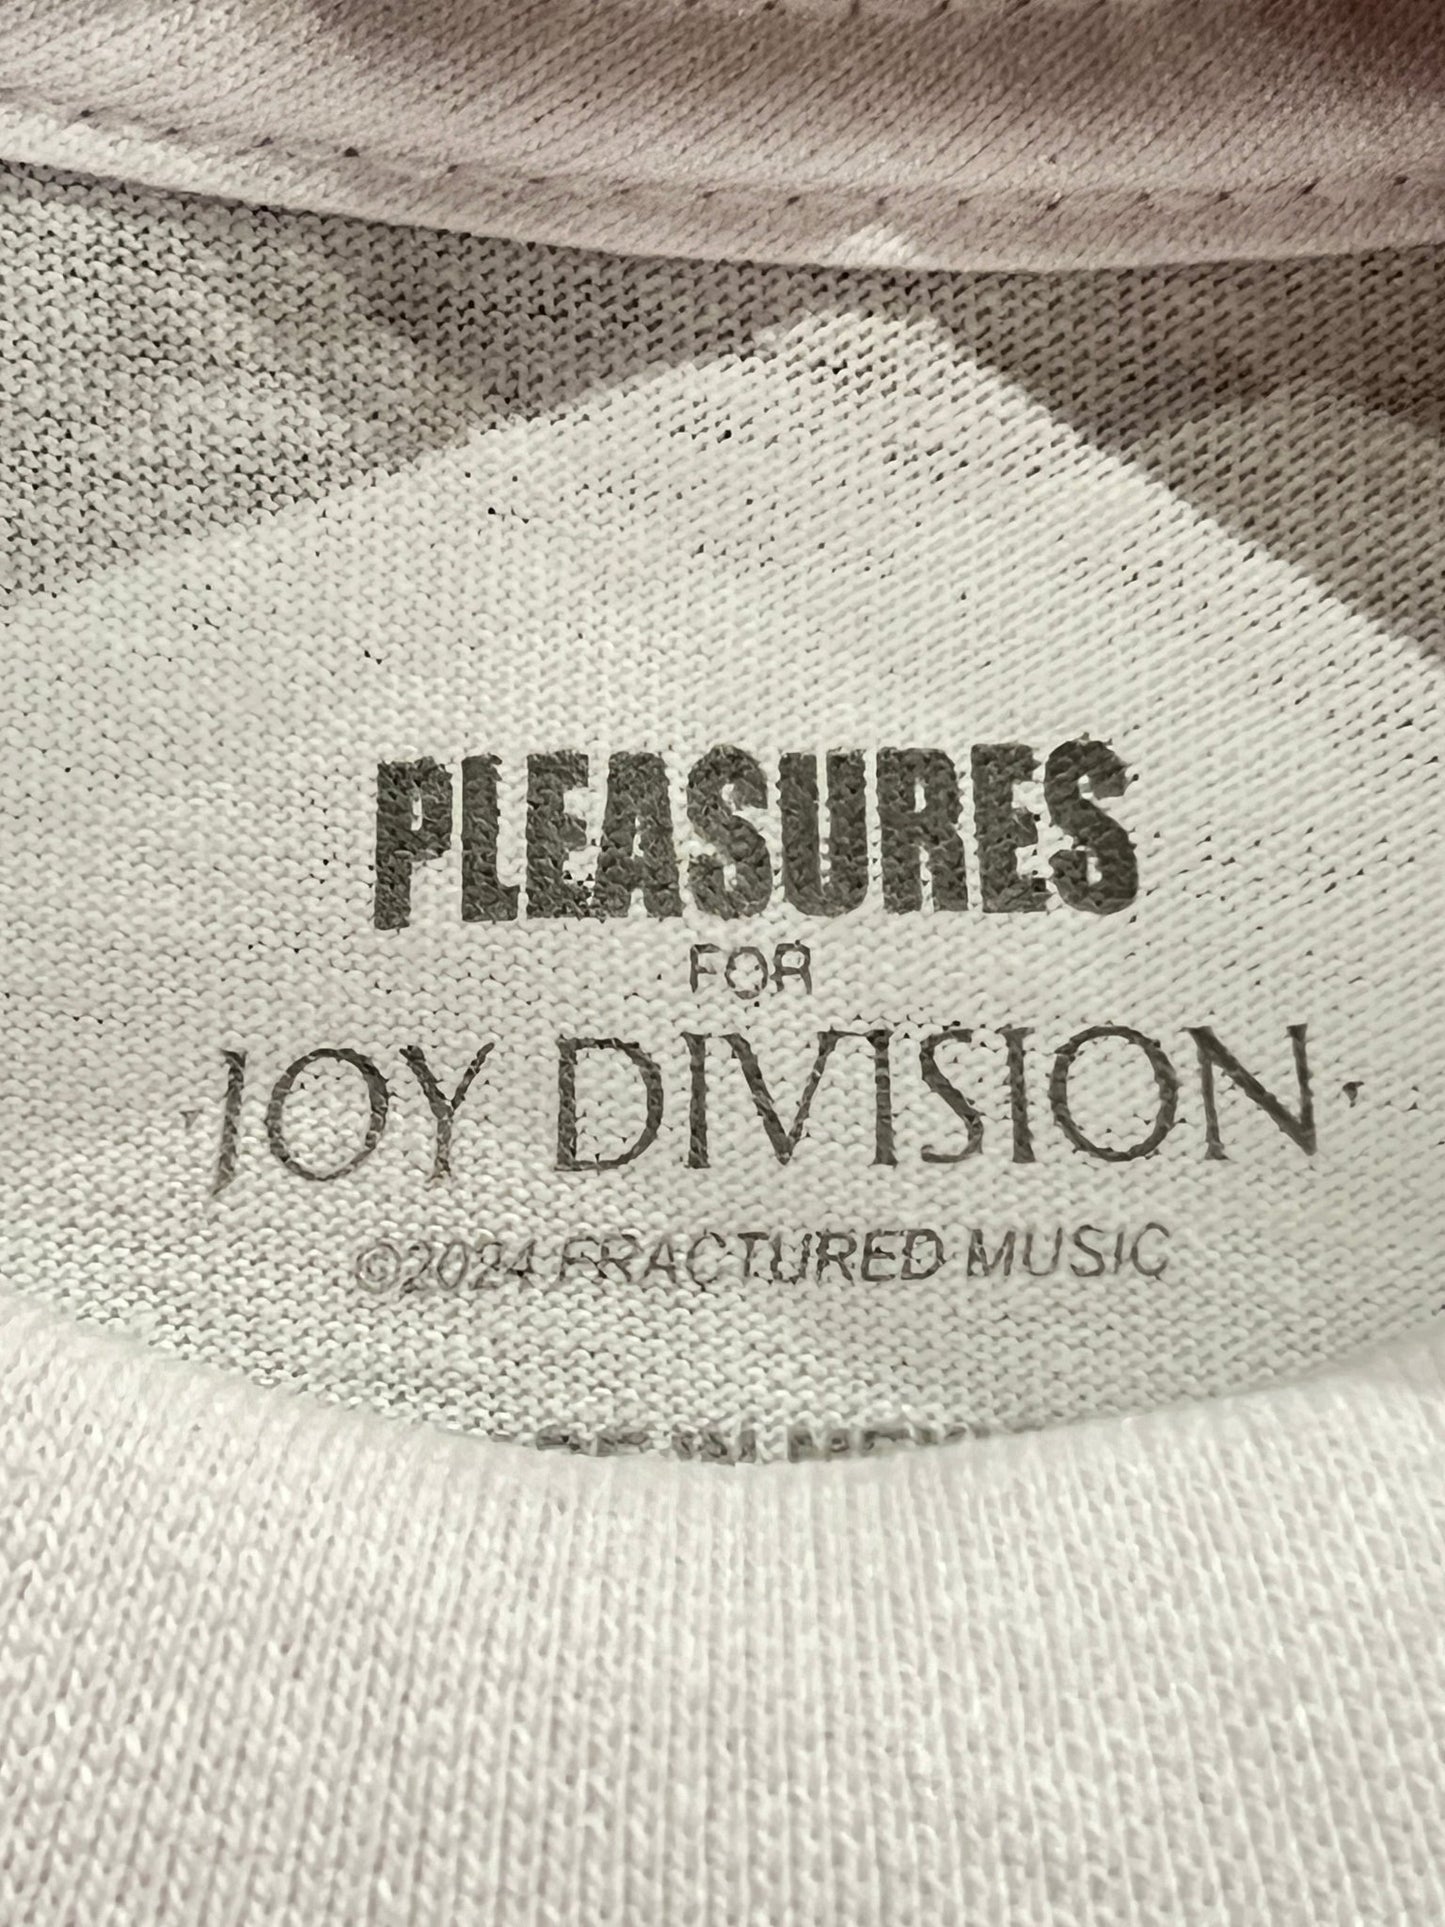 A PLEASURES BROKEN IN T-SHIRT WHT with the text "pleasures for Joy Division collaboration ©️2014 fractured music.